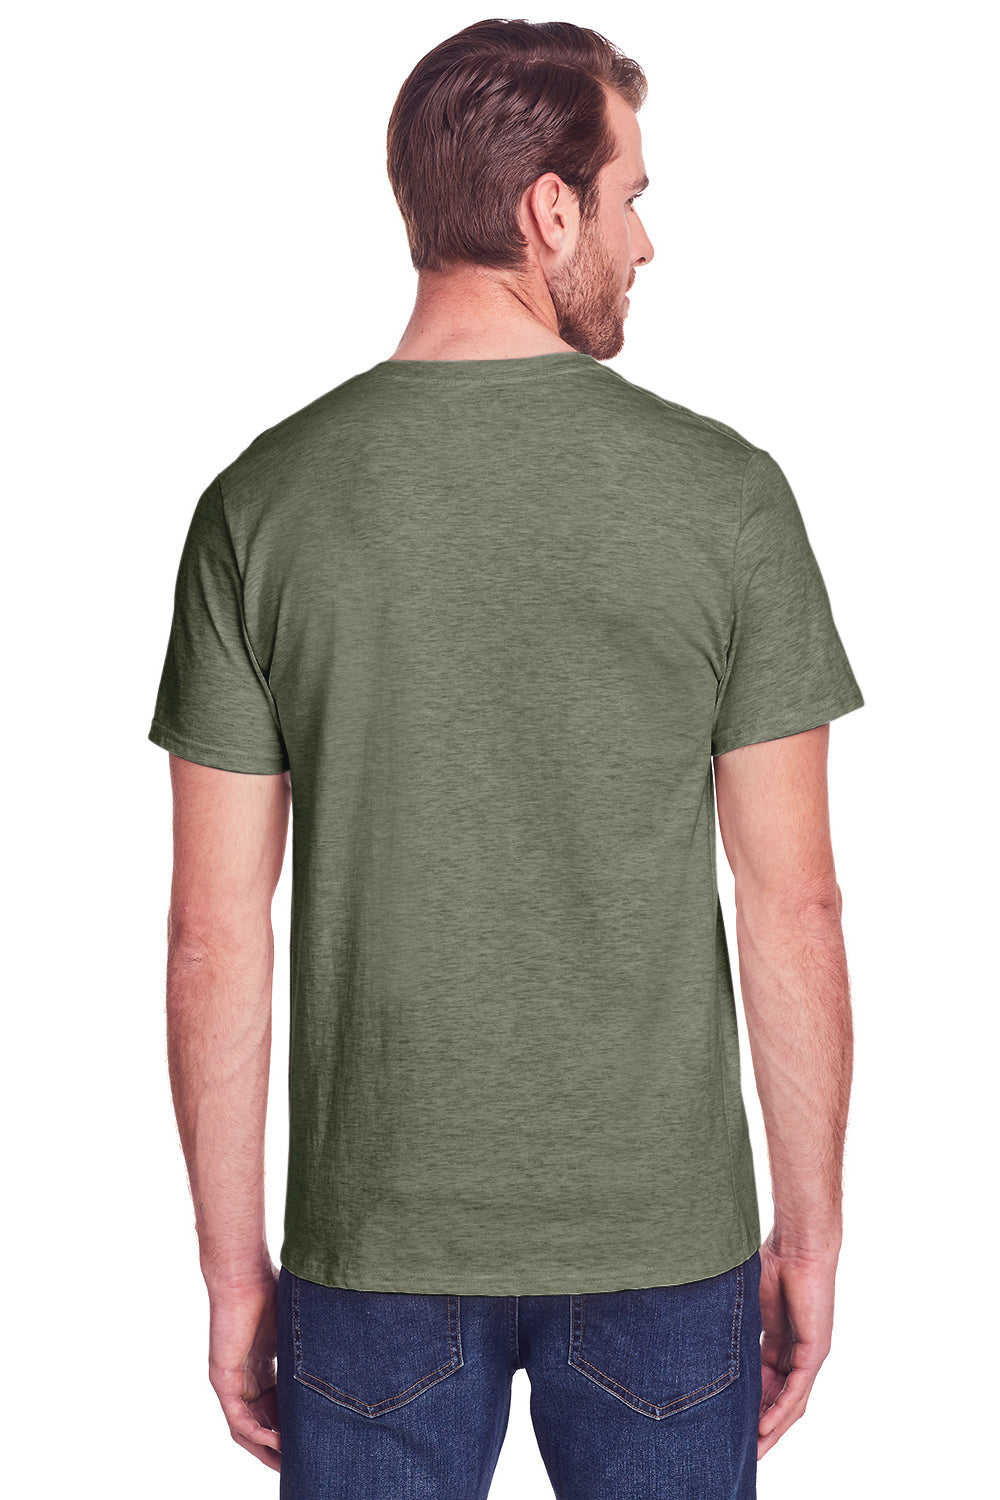 Fruit Of The Loom IC47MR Mens Iconic Short Sleeve Crewneck T-Shirt Heather Military Green Back